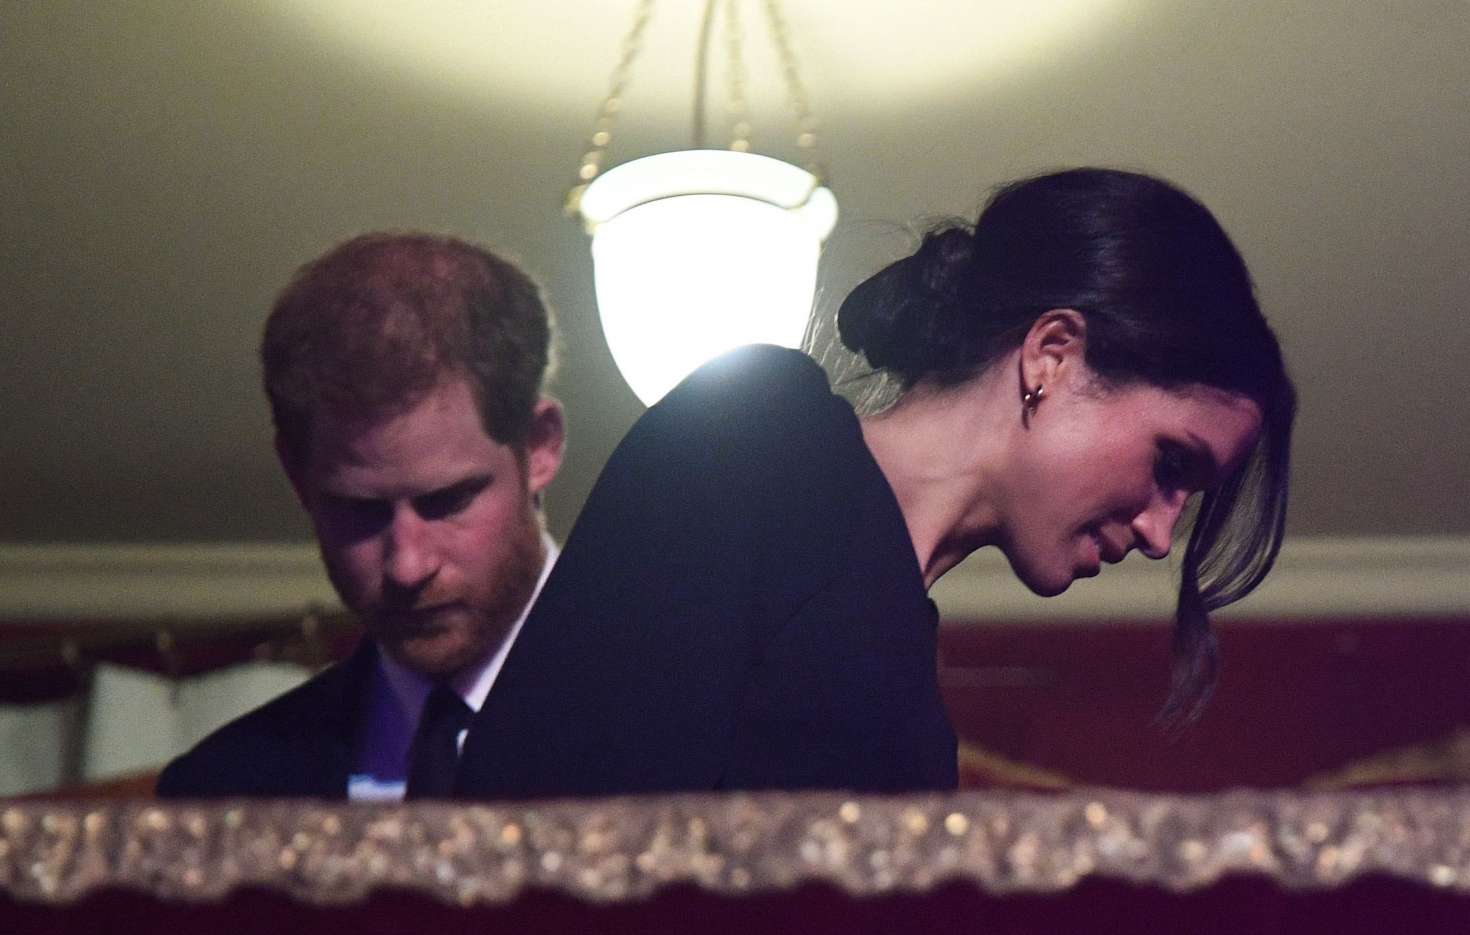 Meghan Markle and Prince Harry â€“ Celebrating the Queen Elizabethâ€™s 92nd Birthday in London